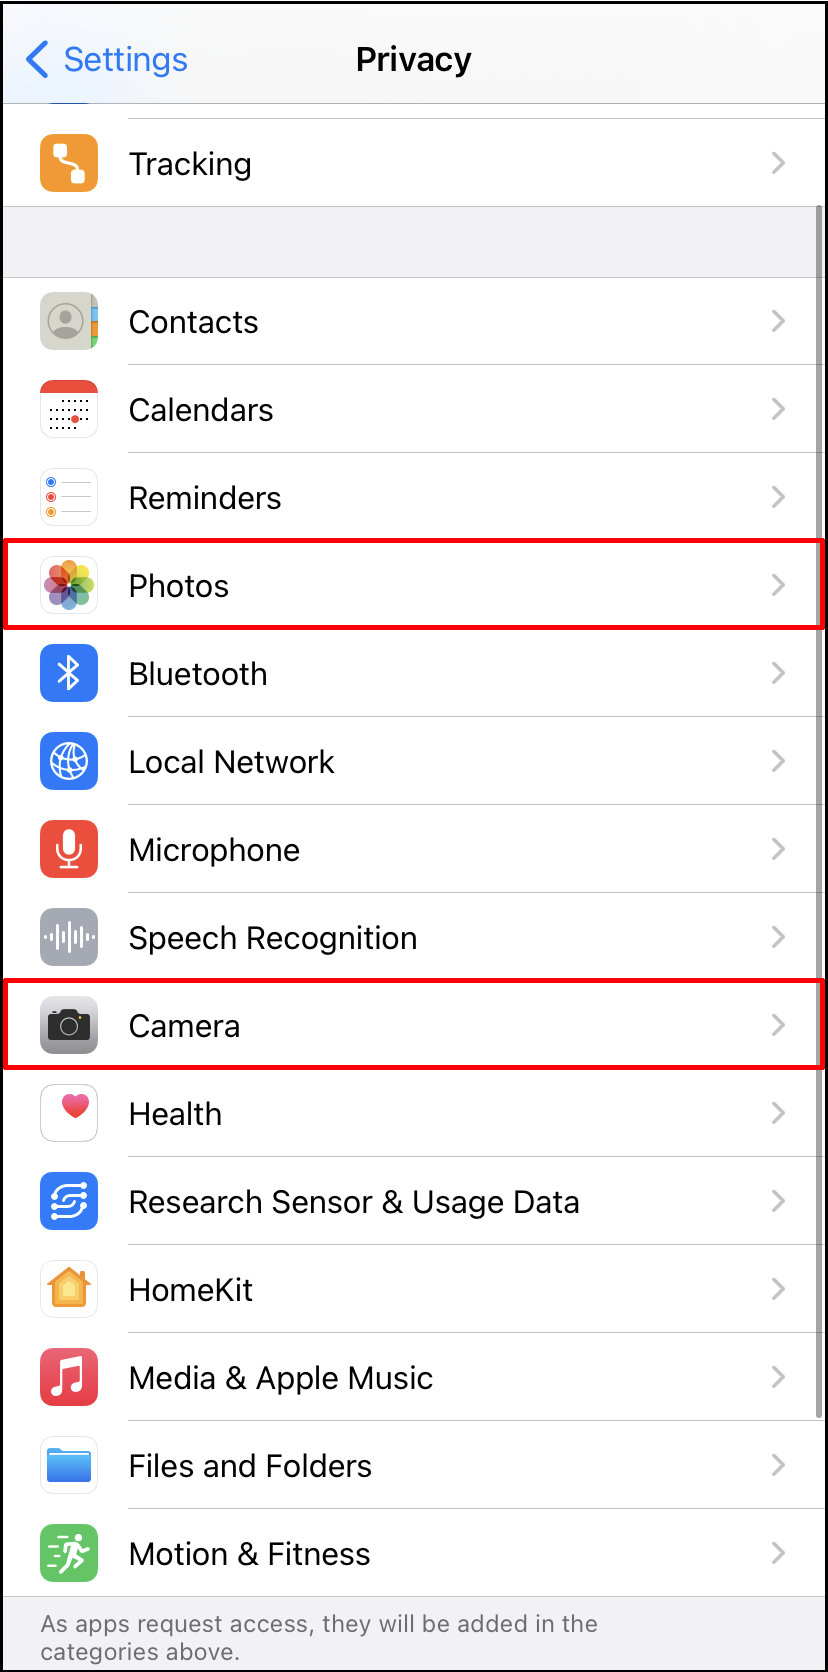 Privacy_Settings_iOS.png